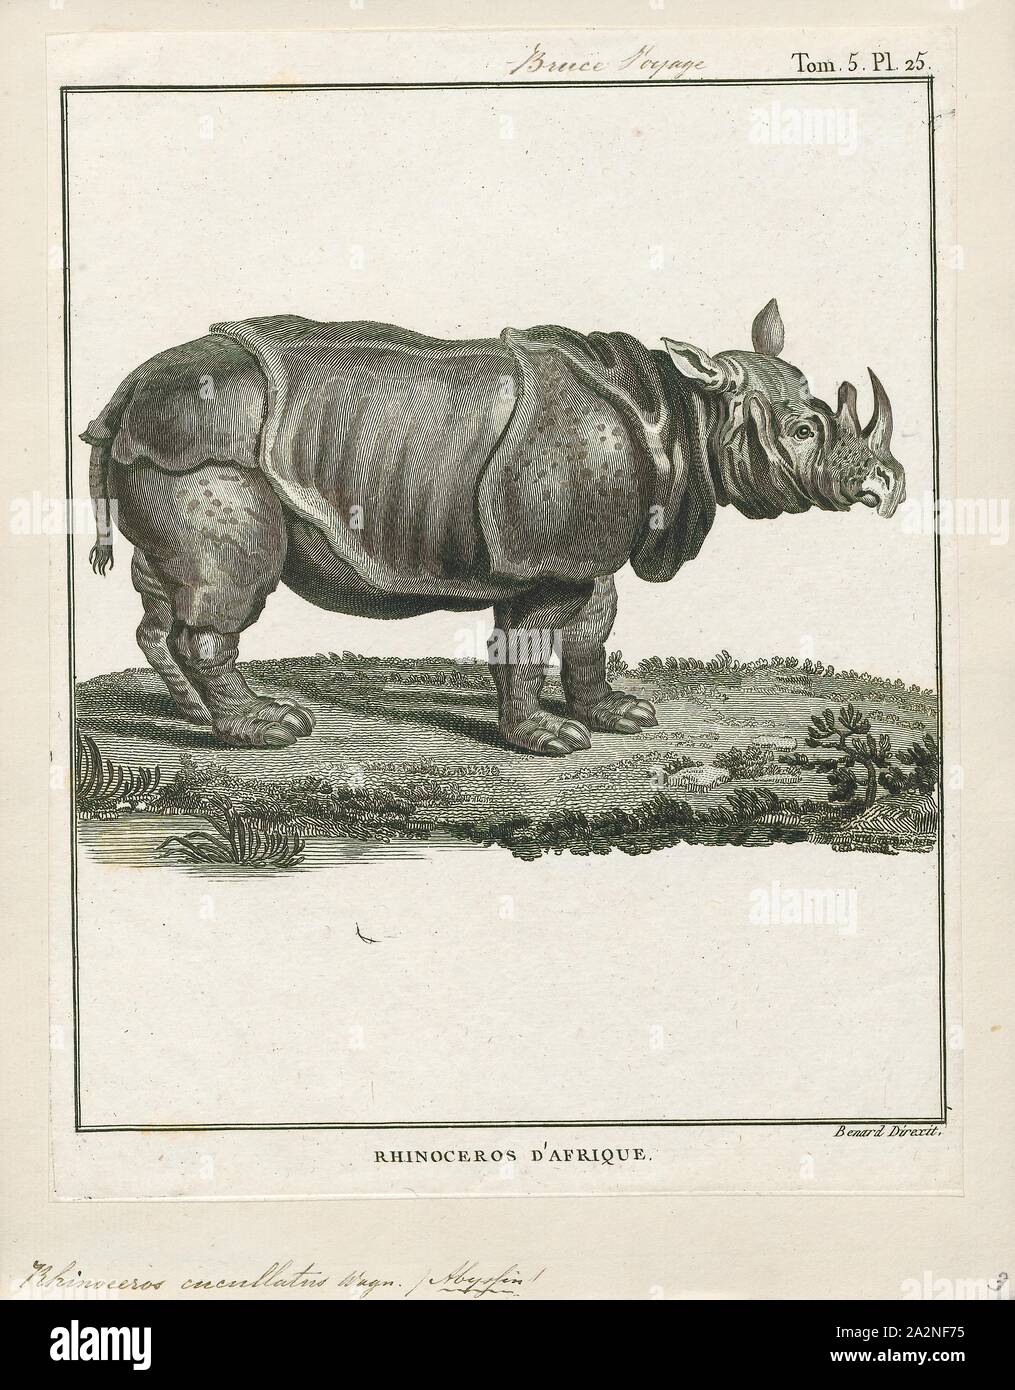 Rhinoceros cucullatus, Print, A rhinoceros, commonly abbreviated to rhino, is one of any five extant species of odd-toed ungulates in the family Rhinocerotidae, as well as any of the numerous extinct species therein. Two of the extant species are native to Africa and three to Southern Asia. The term 'rhinoceros' is often more broadly applied to now extinct species of the superfamily Rhinocerotoidea., 1700-1880 Stock Photo